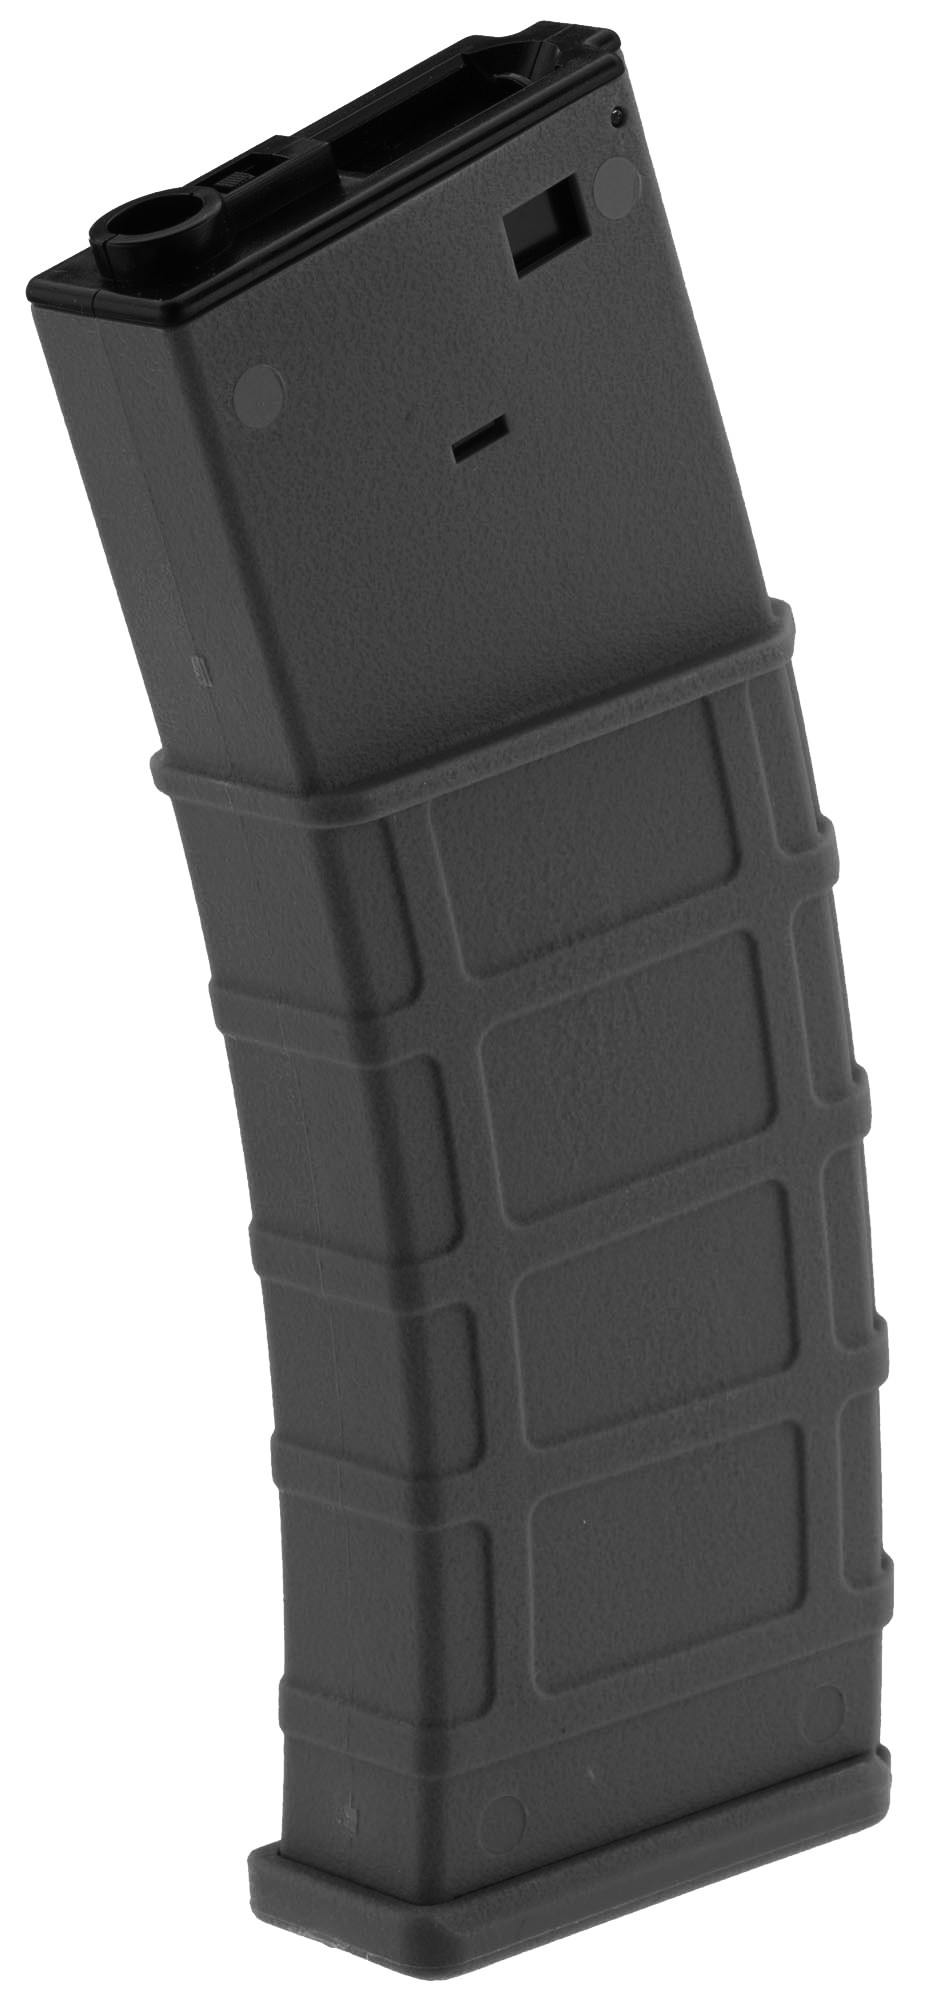 Photo Airsoft Magazine Polymer Flash Hi Cap 360 rds for M4-M16 (made by Lonex) - Black